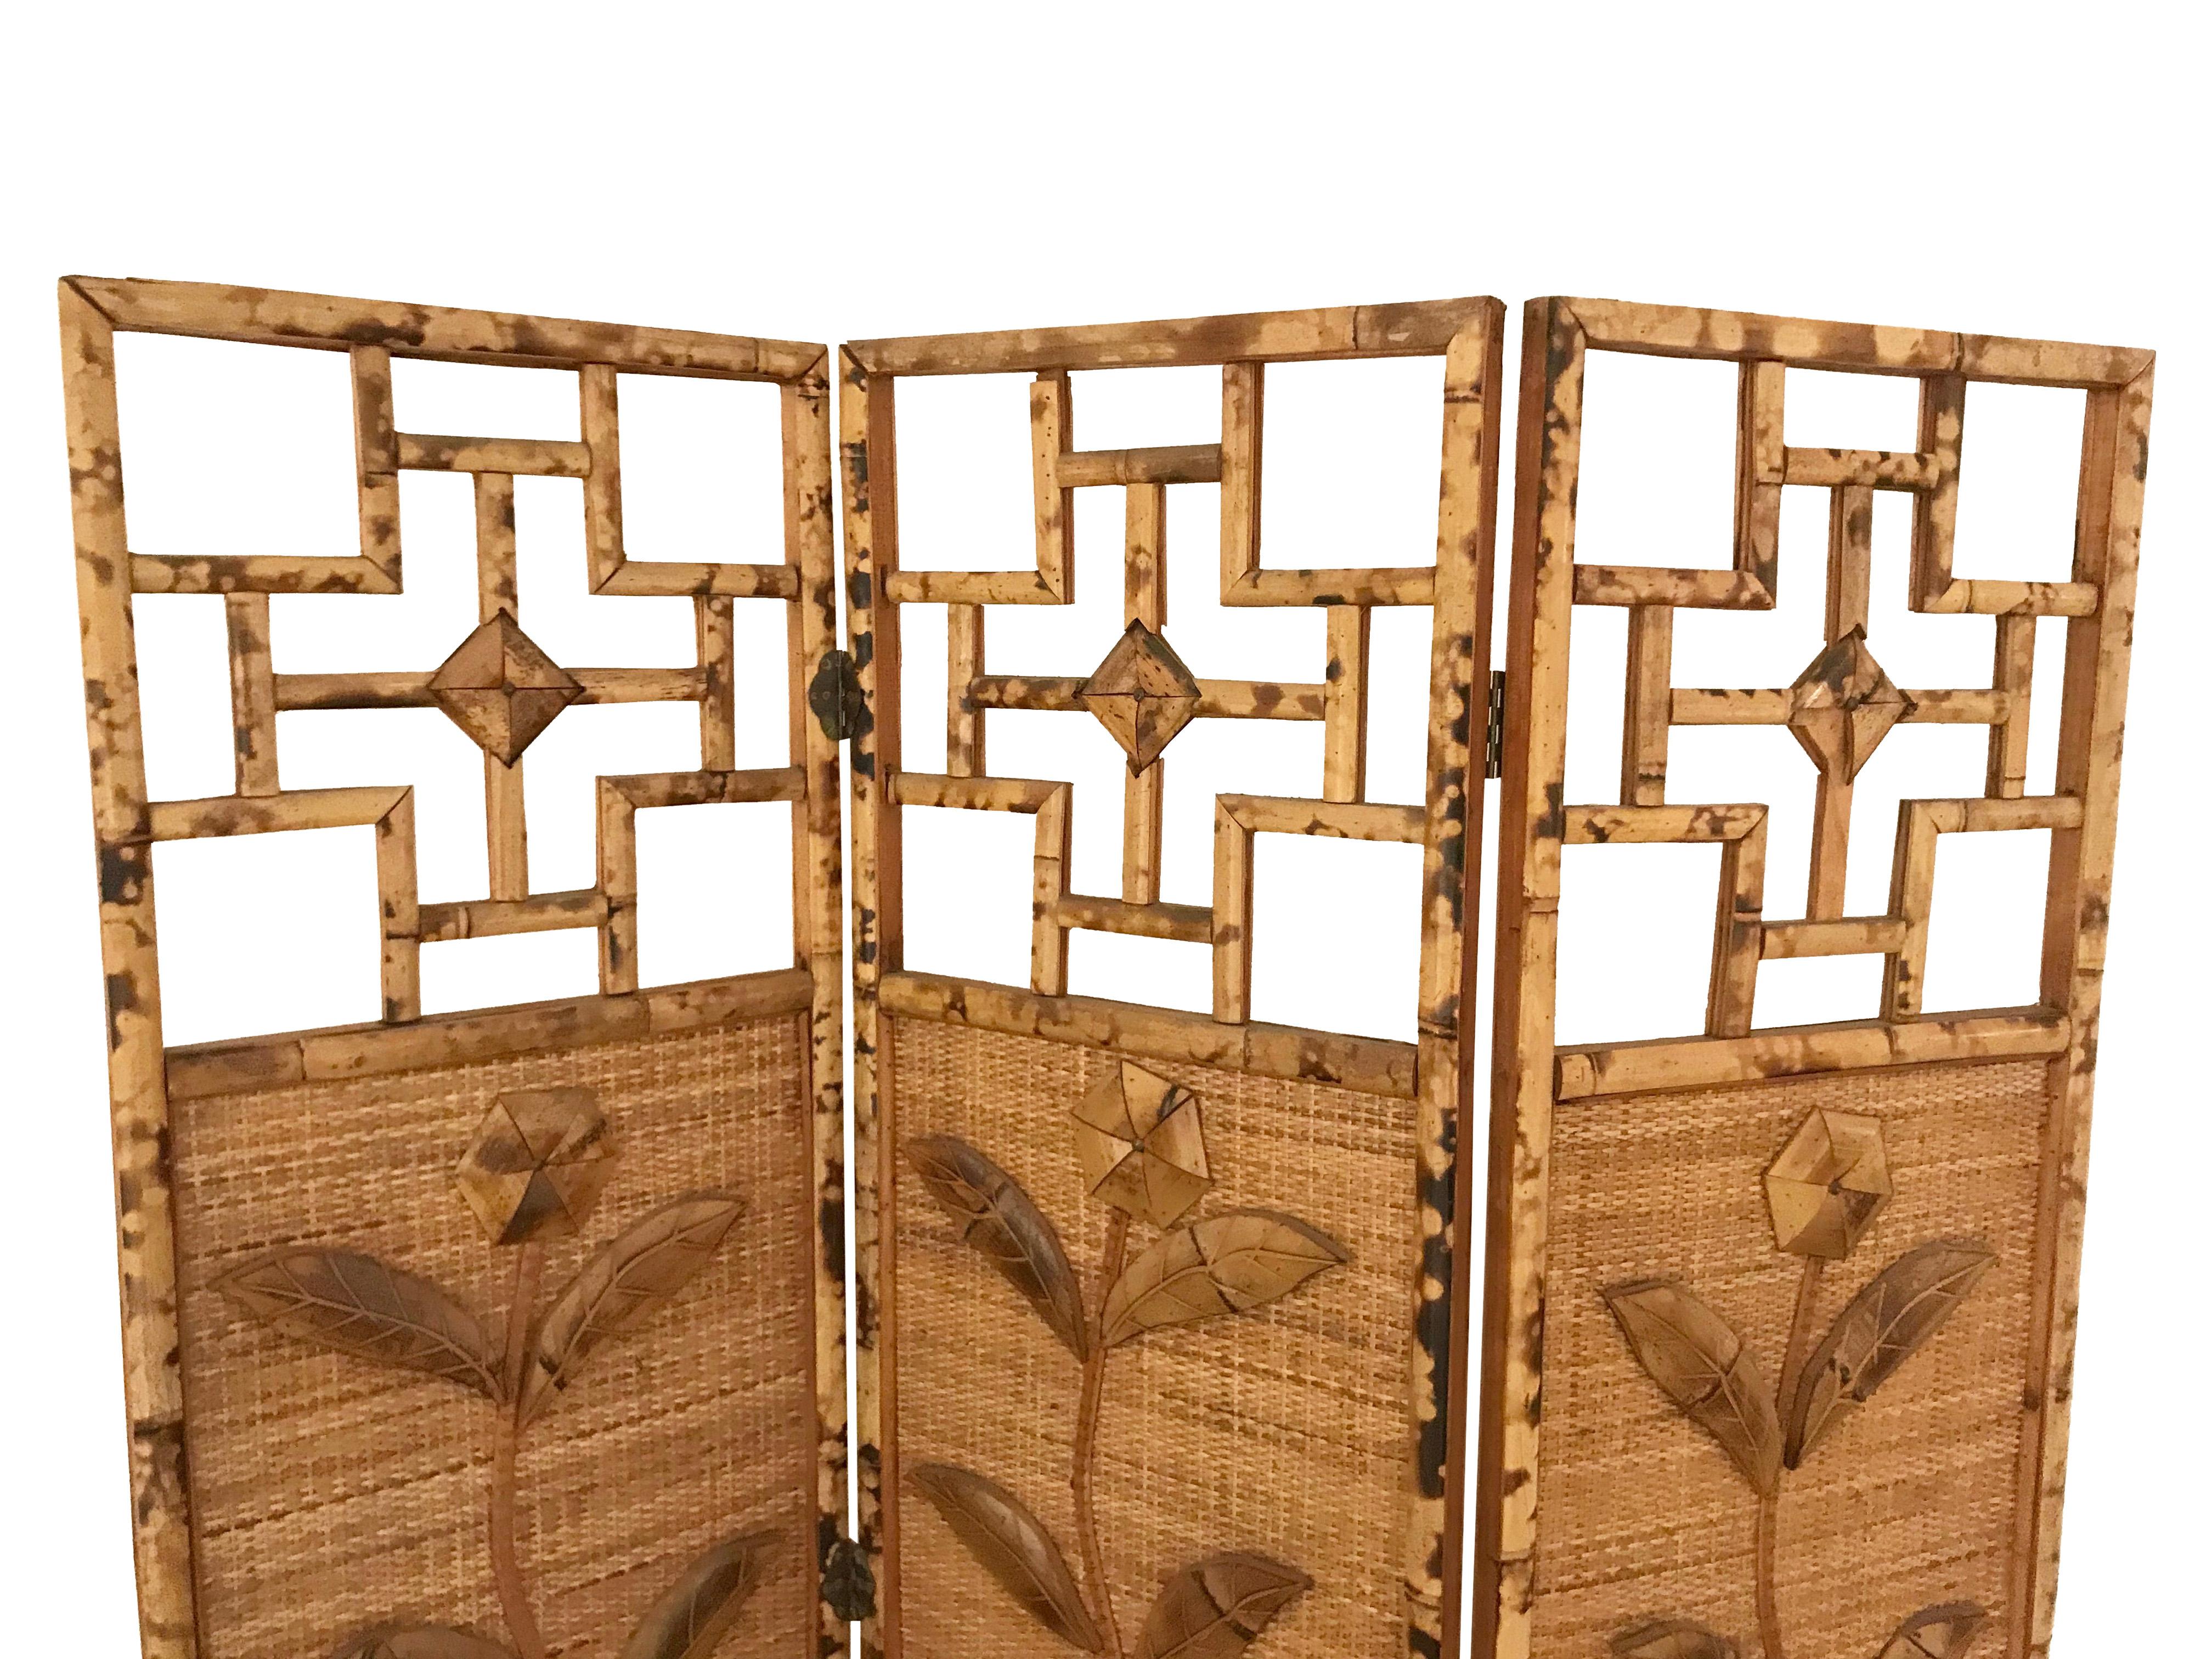 A three panelled French Riviera 1970s rattan and bamboo screen /room divider, with relief flower motifs on the front and back of the central panels, with brass hinges.